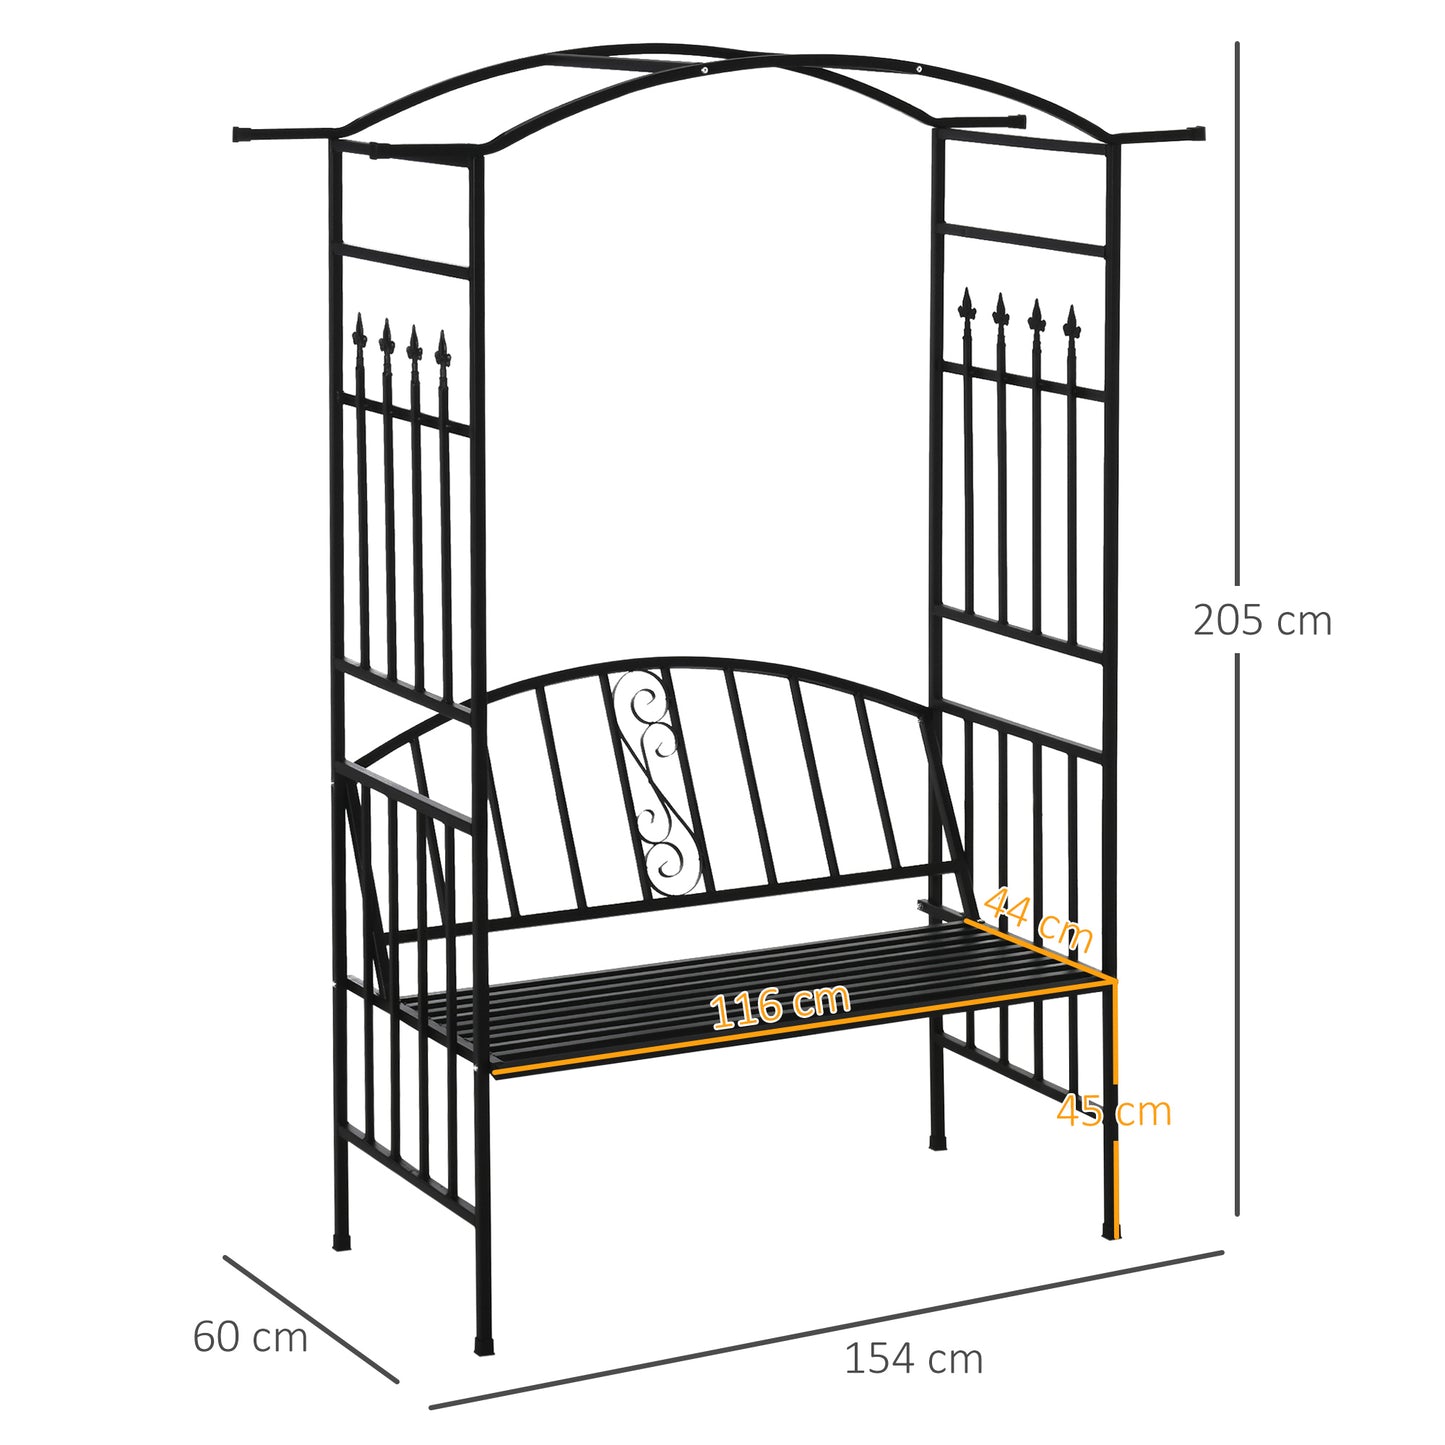 Outsunny Steel Frame Outdoor Garden Arch w/ 2-Seater Bench Black